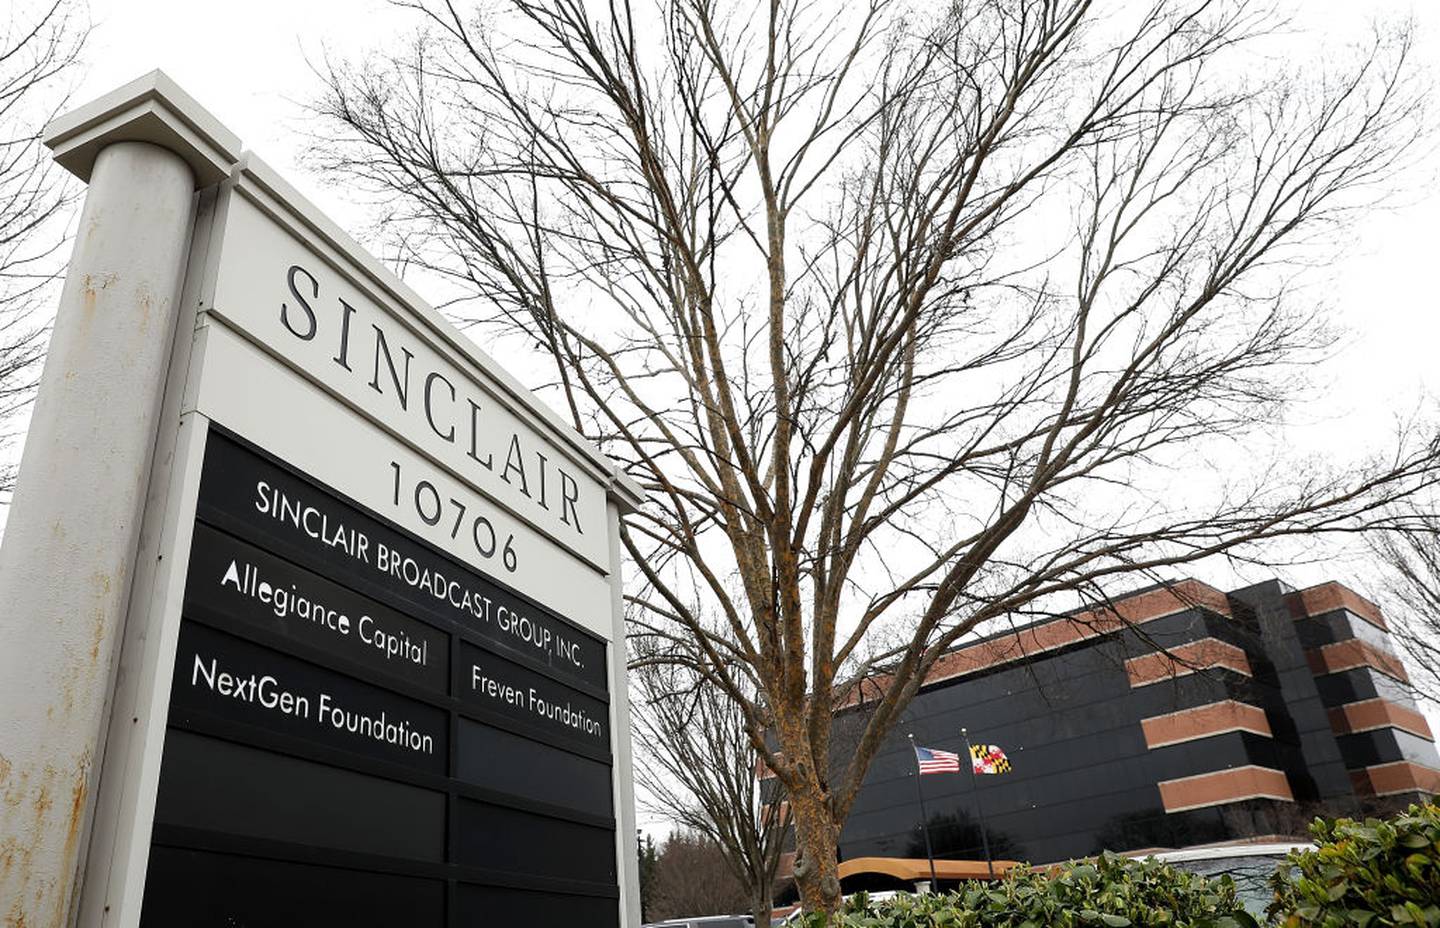 HUNT VALLEY, MD - APRIL 03:  The headquarters of the Sinclair Broadcast Group is shown April 3, 2018 in Hunt Valley, Maryland.